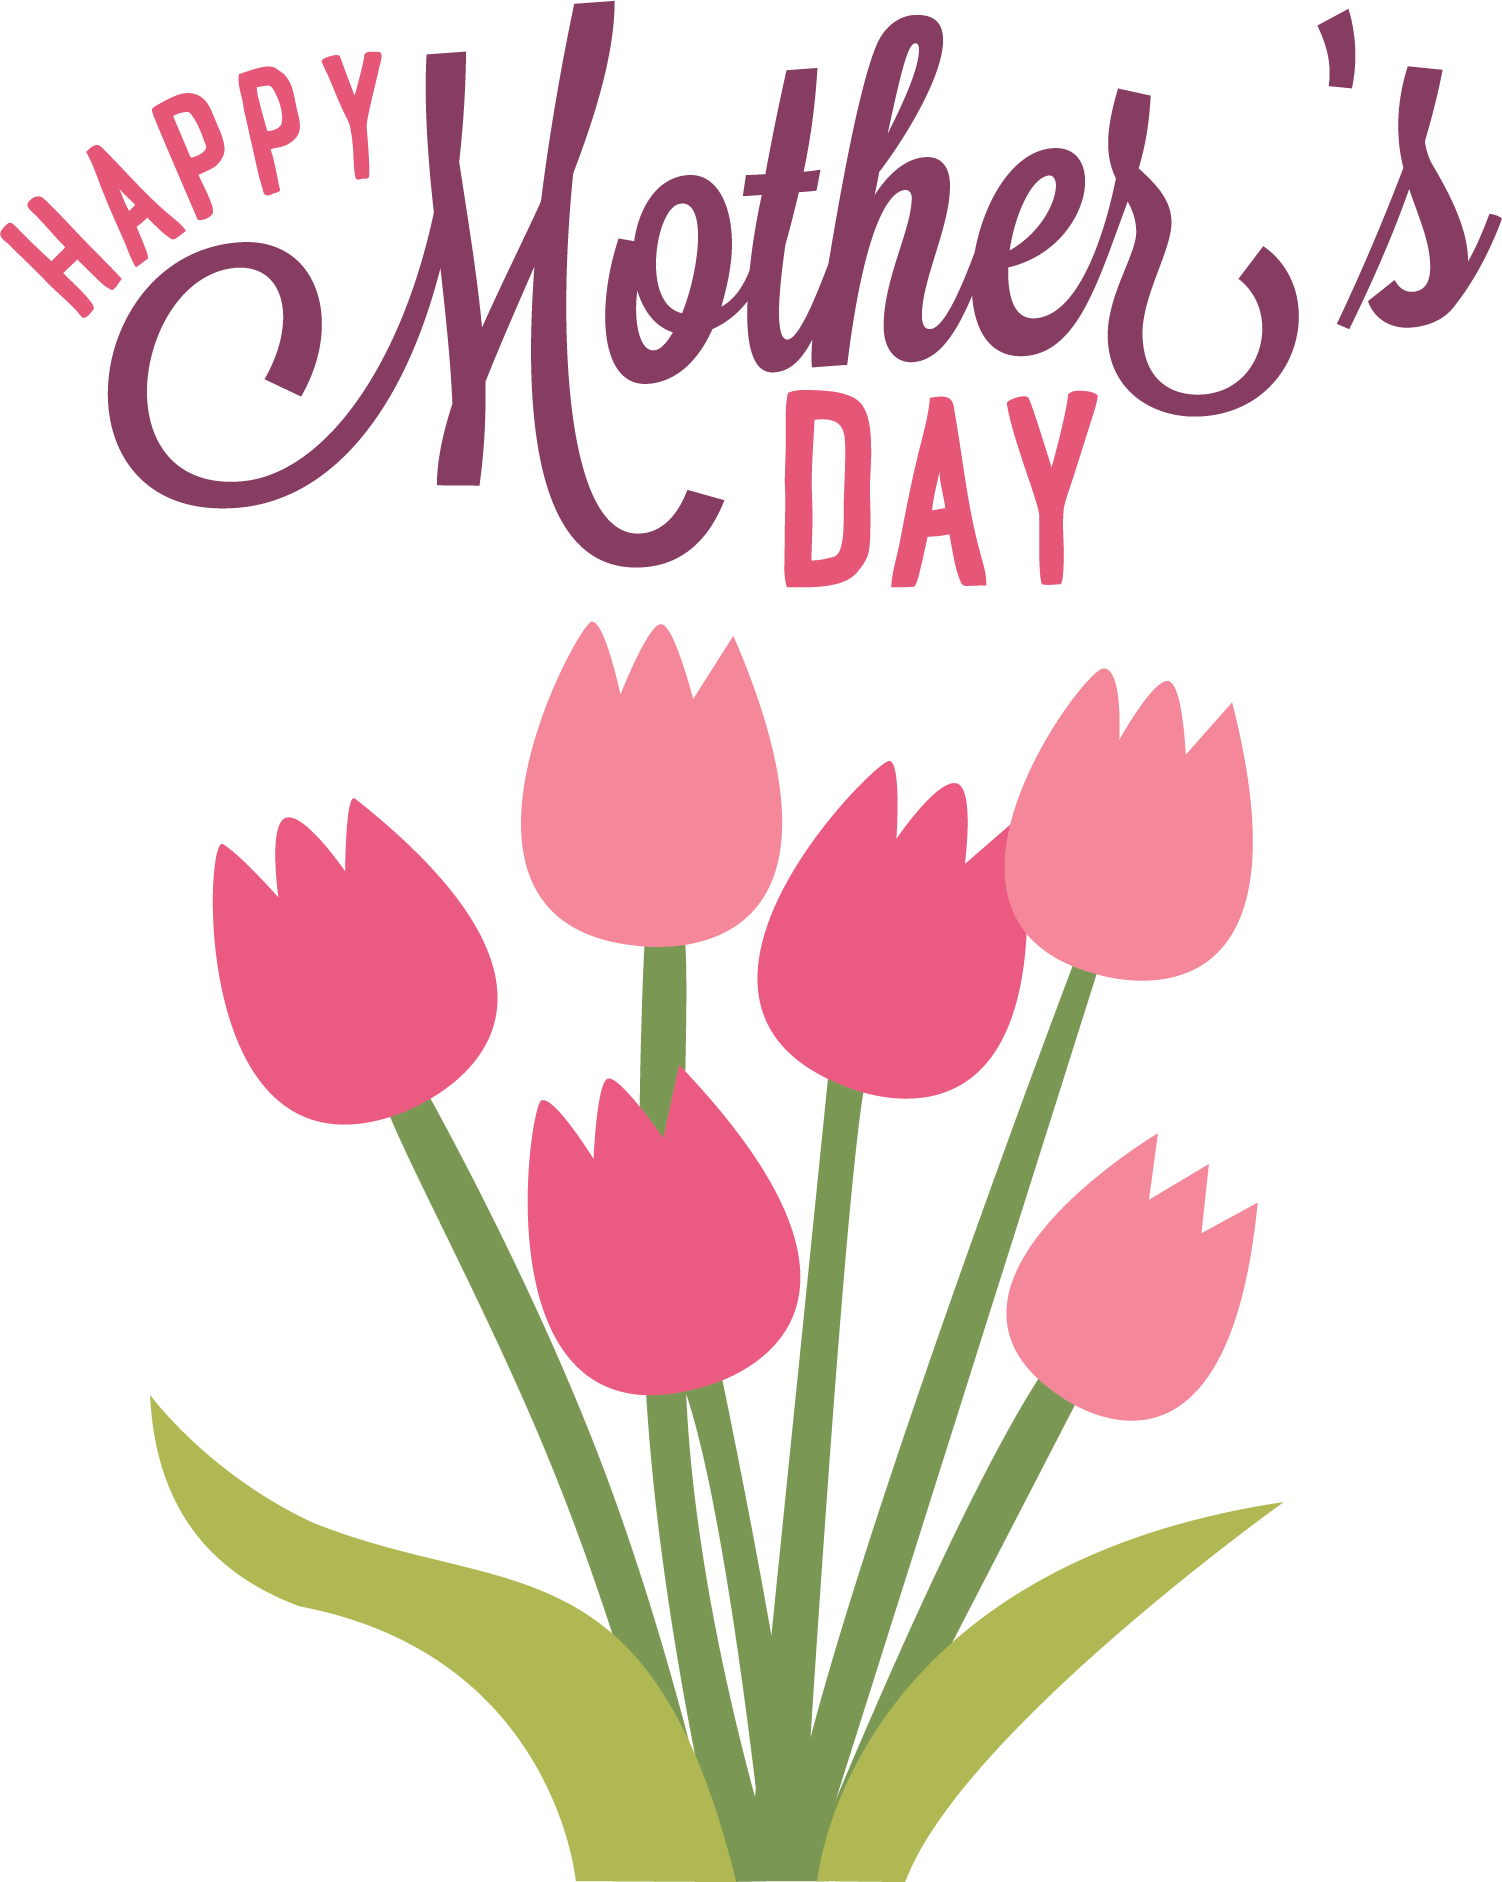 Clipart flower happy mothers day, Clipart flower happy mothers day